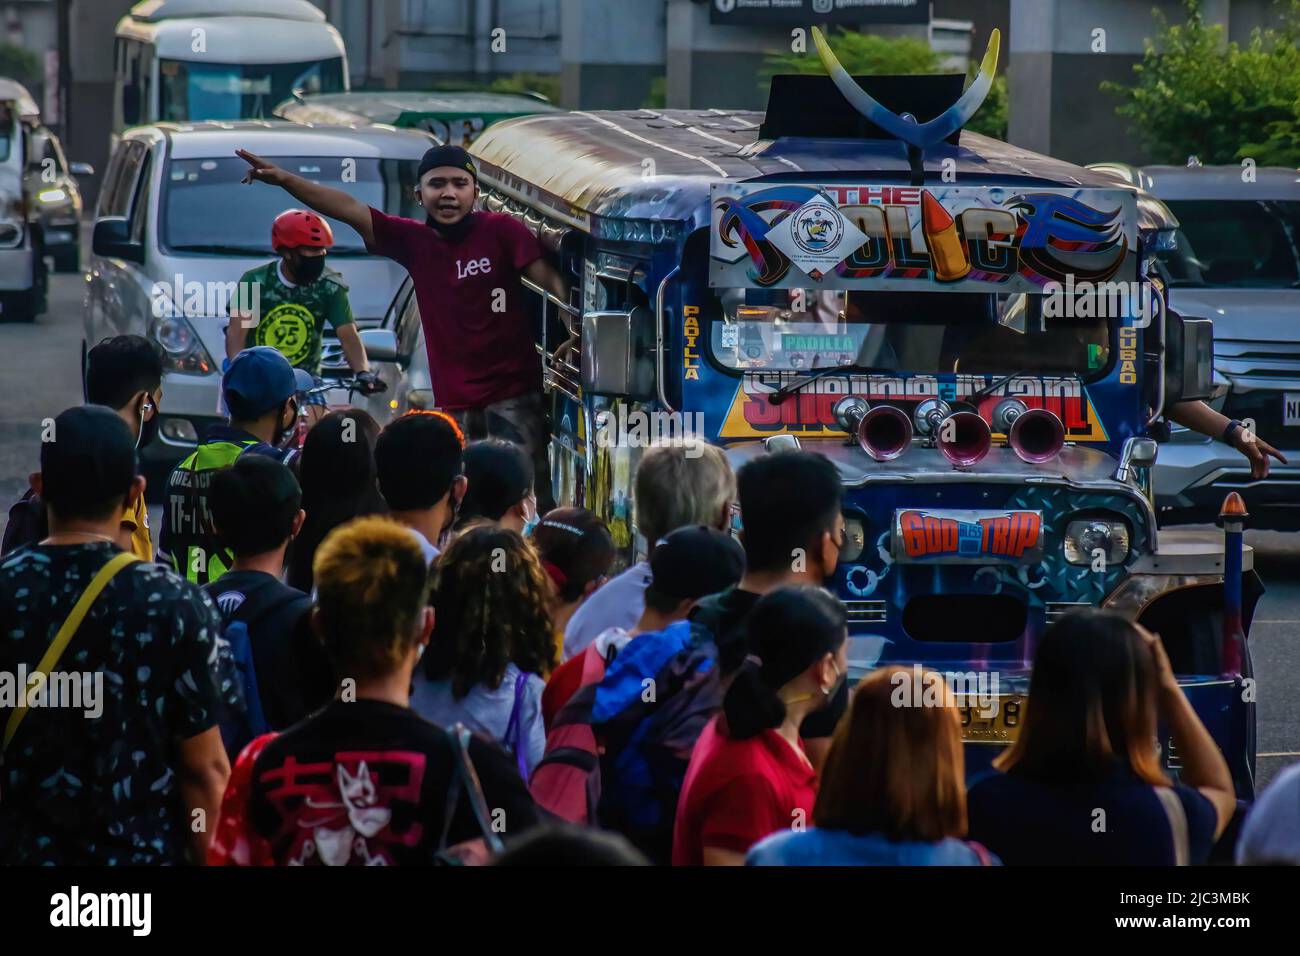 Commuters are seen waiting for the coming jeep manned by a jeepney dispatcher. Diesel fuel, most commonly used for Public Utility Jeepneys (PUJ), a passenger-type jeep, hiked to almost 7 Pesos and reached 75 to 87 Philippine Peso (1.45 to 1.64USD) per liter that caused it's net increase to 36 Pesos. Some jeepney drivers are still halting their trips due to the continues oil price increases. Stock Photo